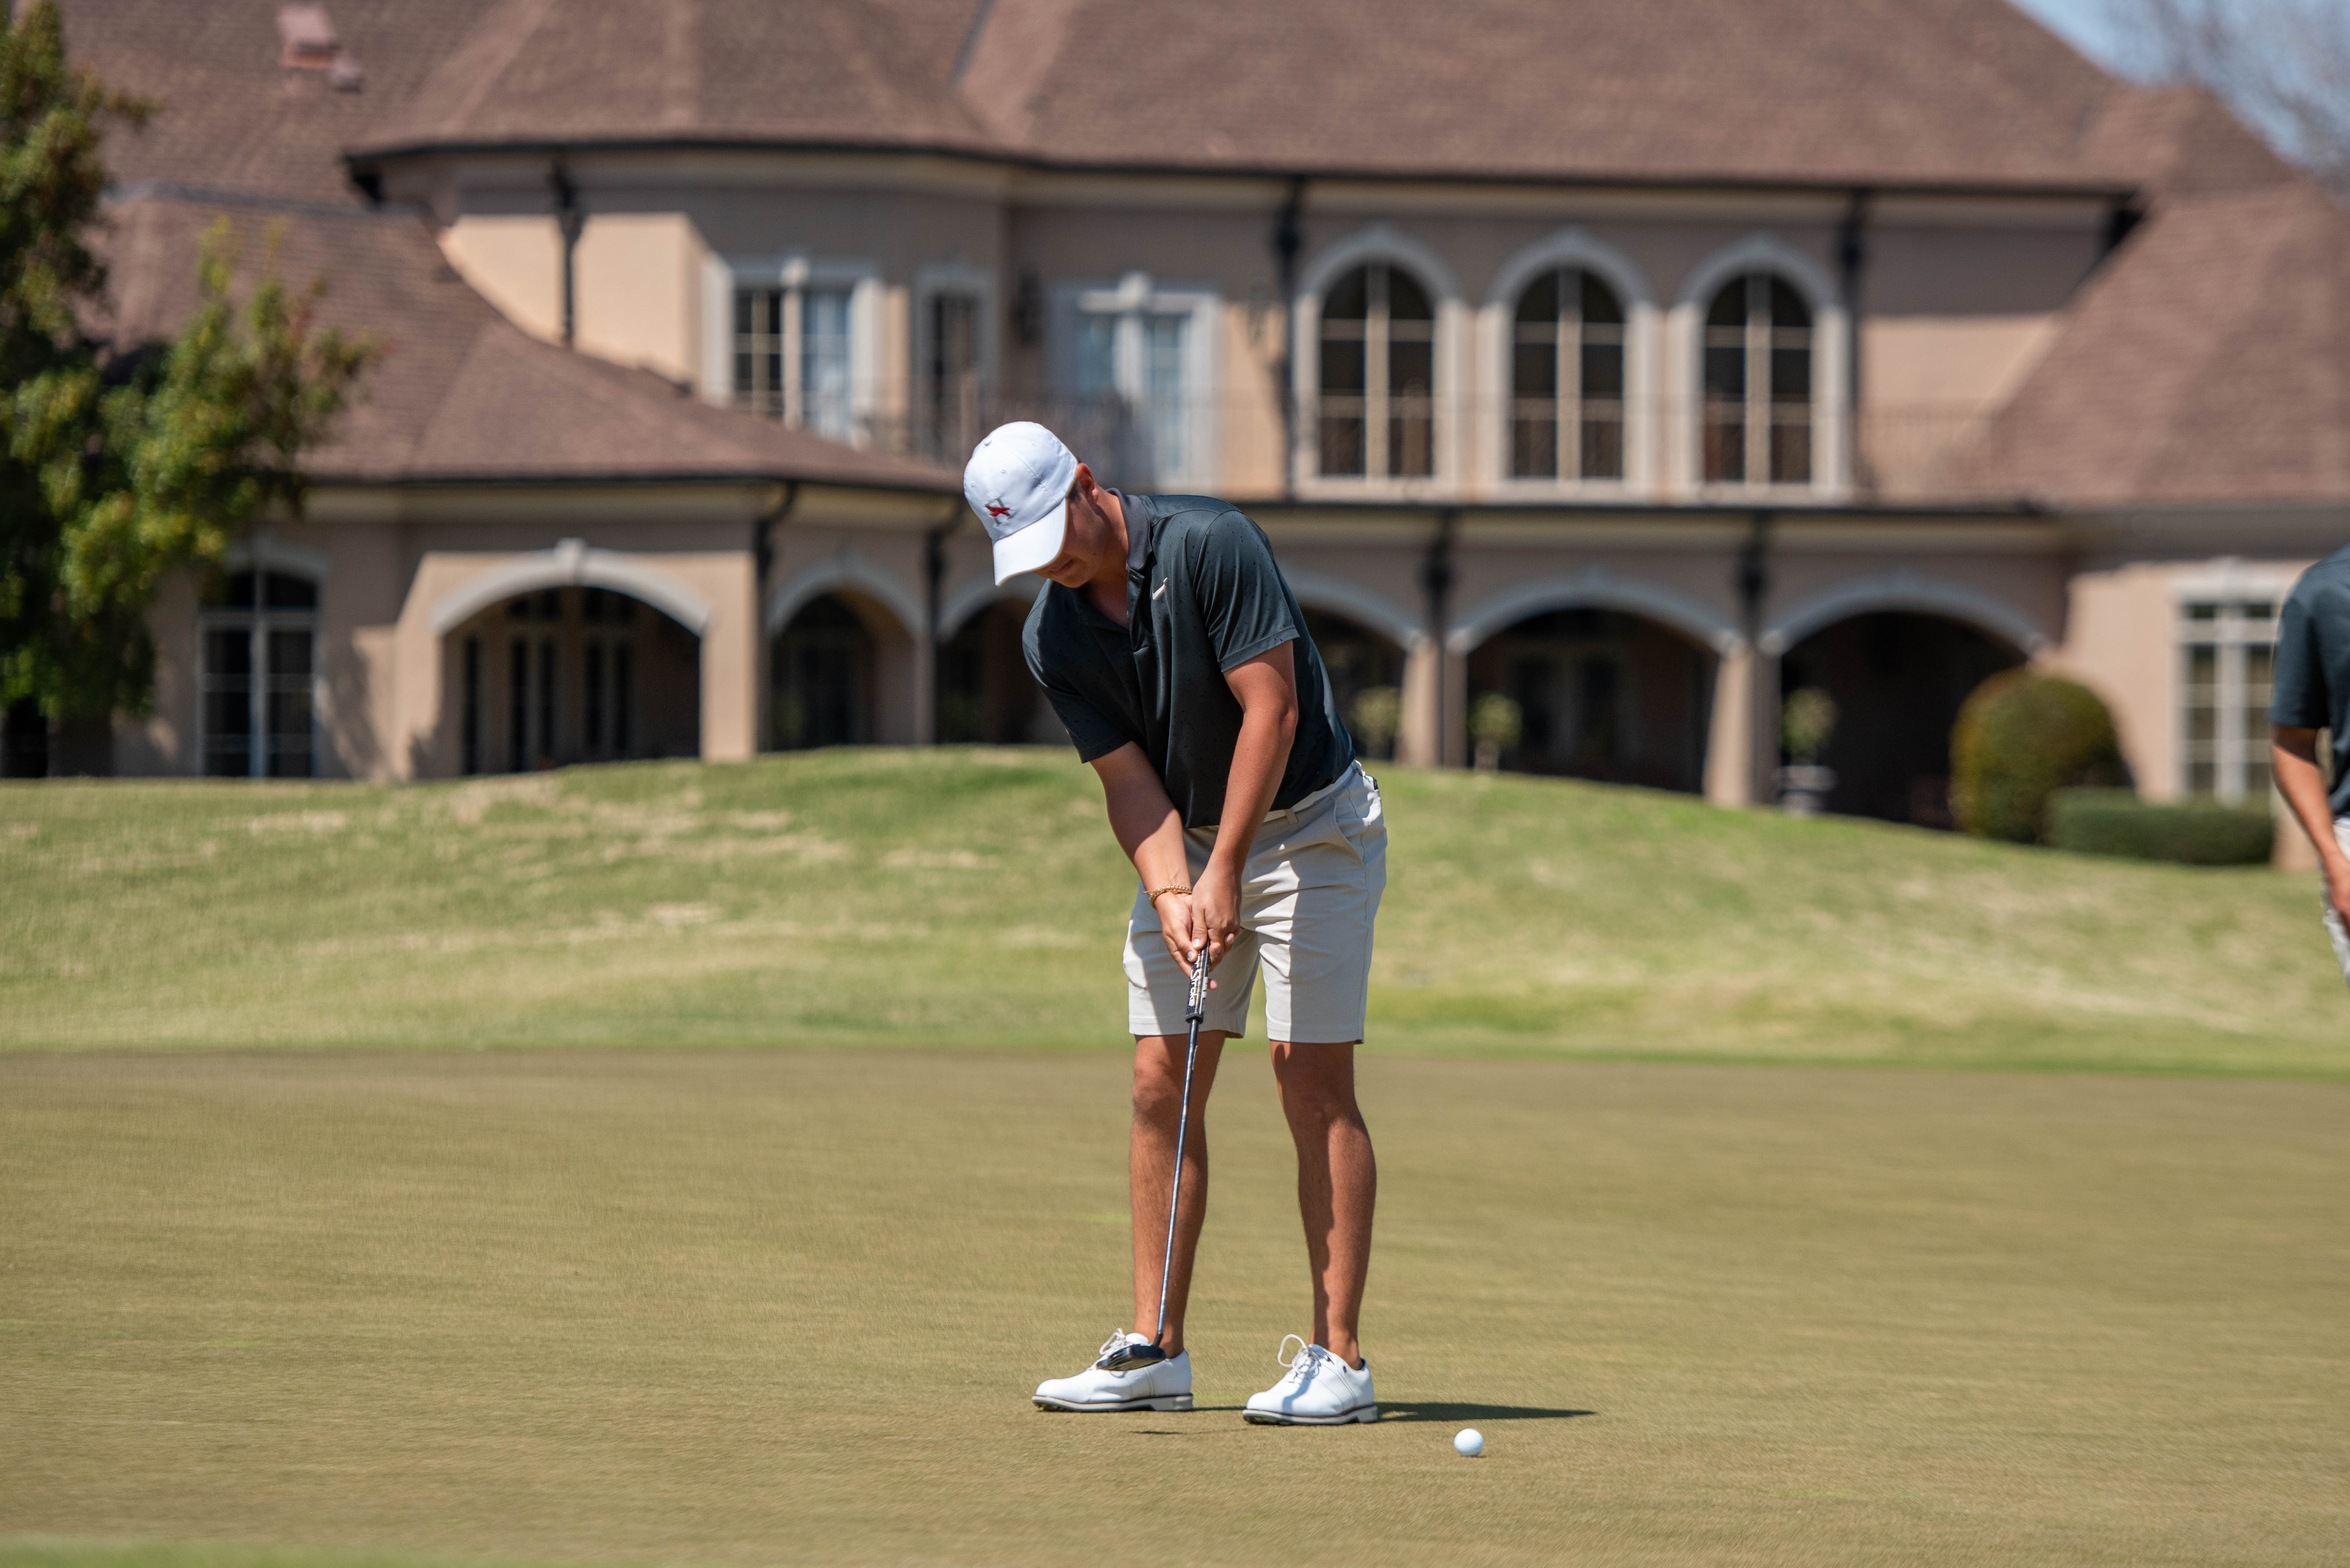 Hawks in 2nd After Round 1 of NCAA Division III Championship